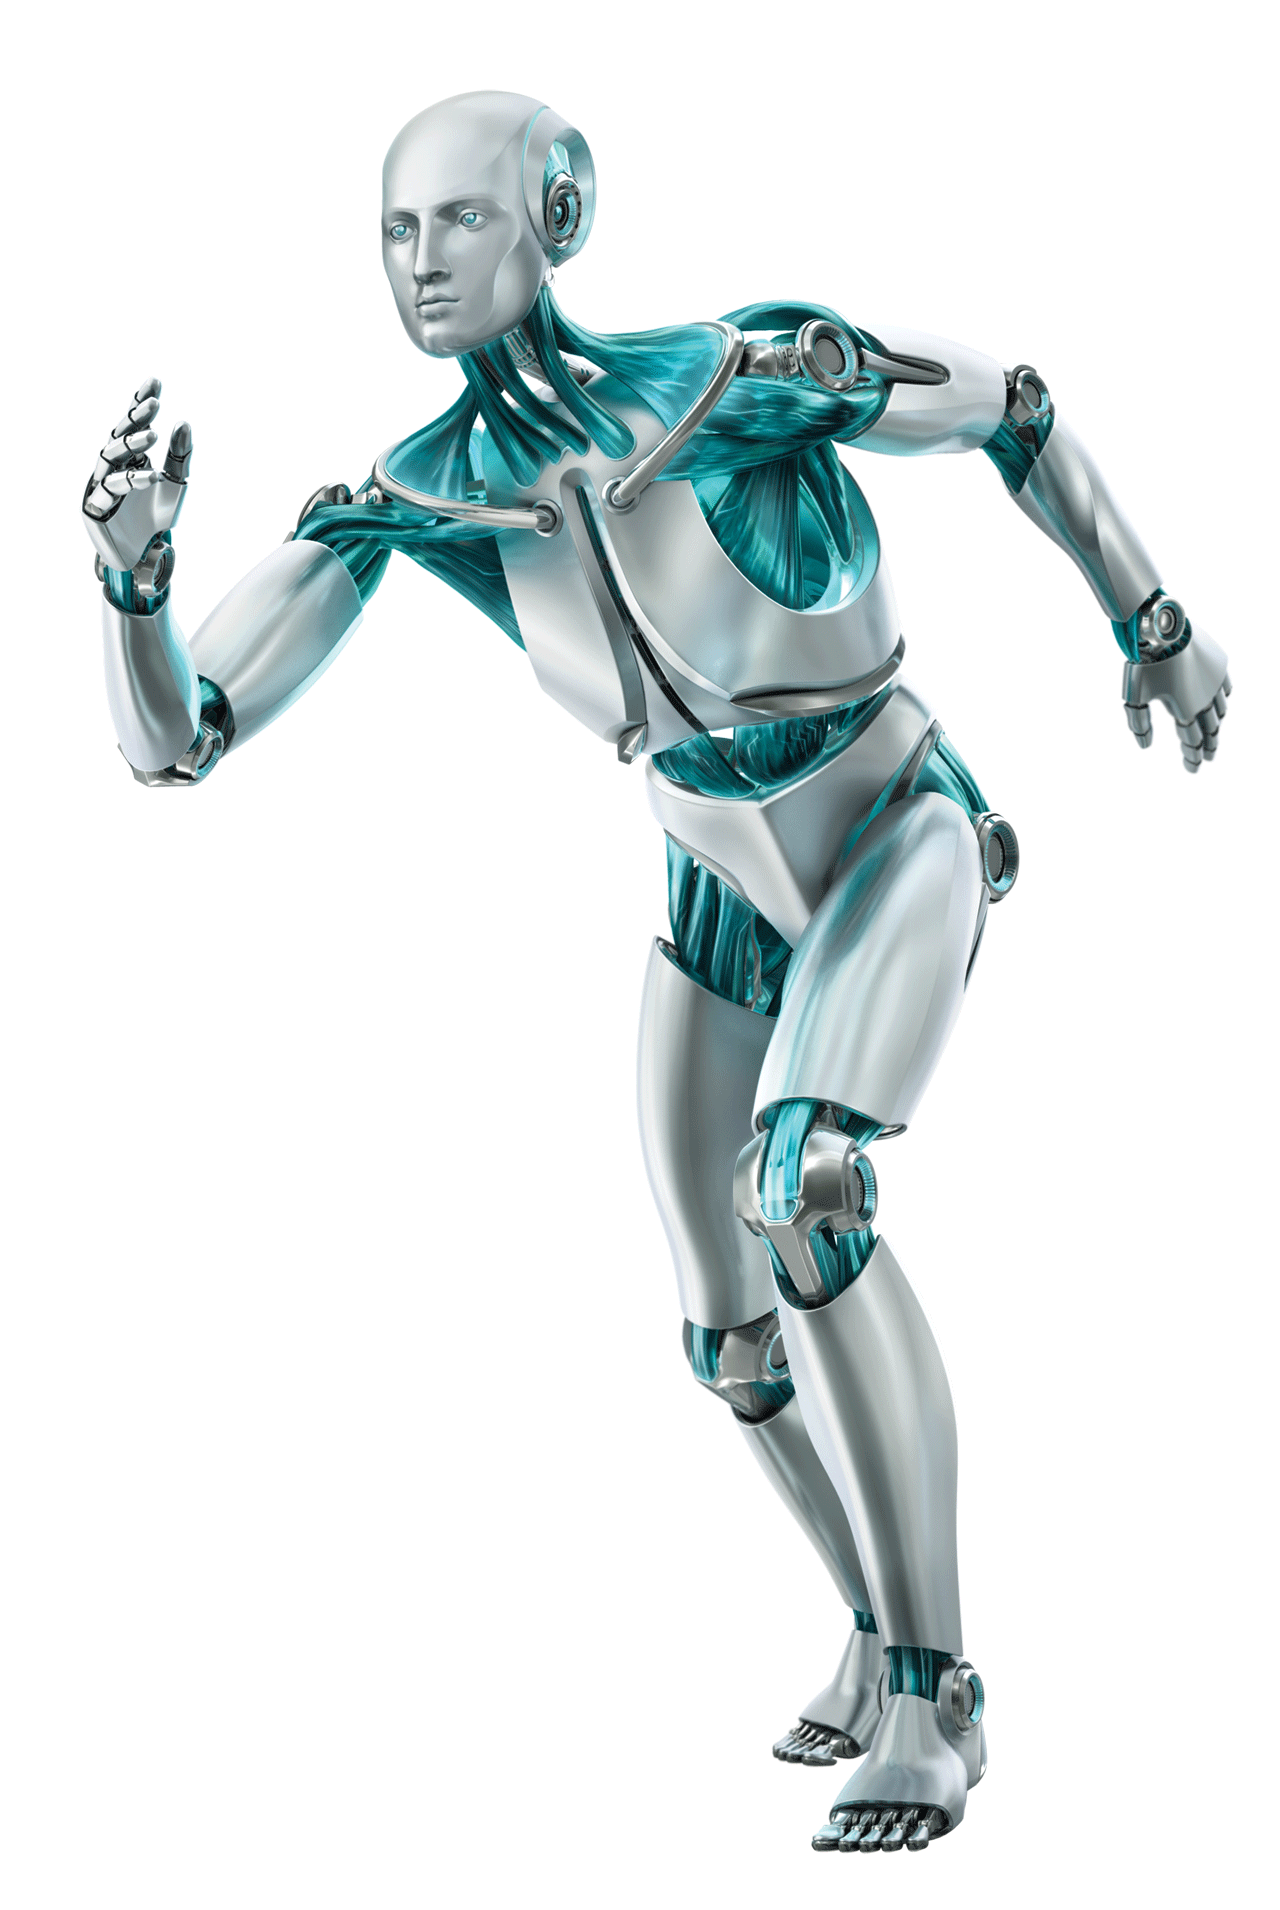 Choosing the ESET product best suited for your protection needs